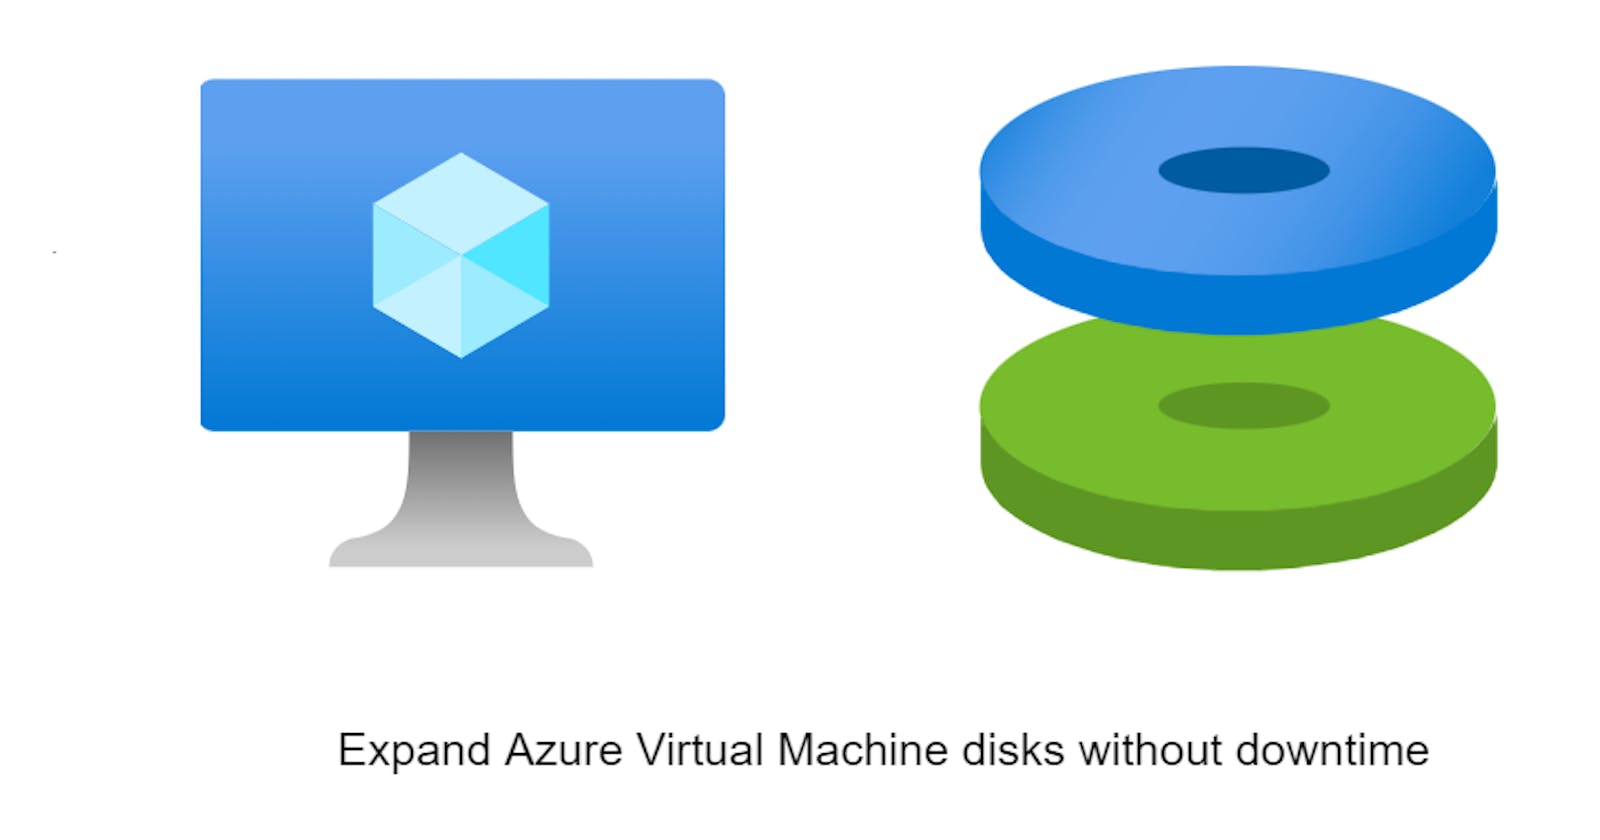 How To Attach A Data Disk To An Existing Virtual Machine And Initialize It For Use In Azure.